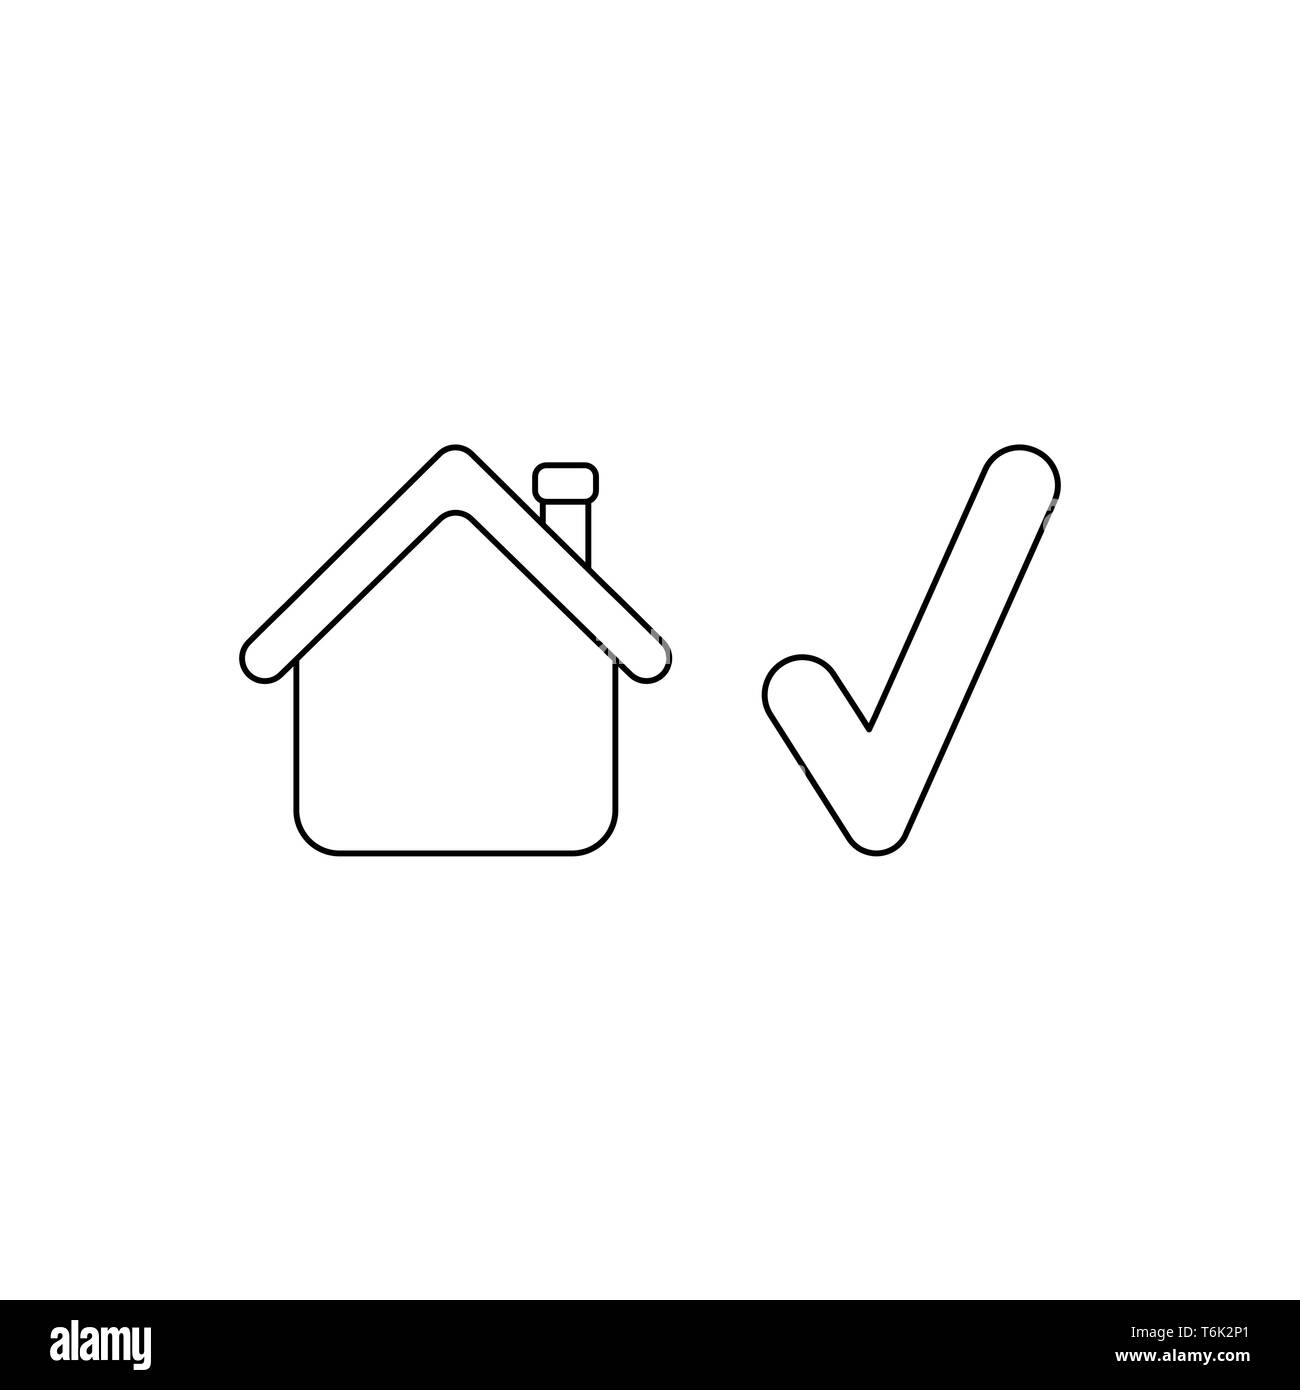 Vector icon concept of house with check mark. Black outlines. Stock Vector